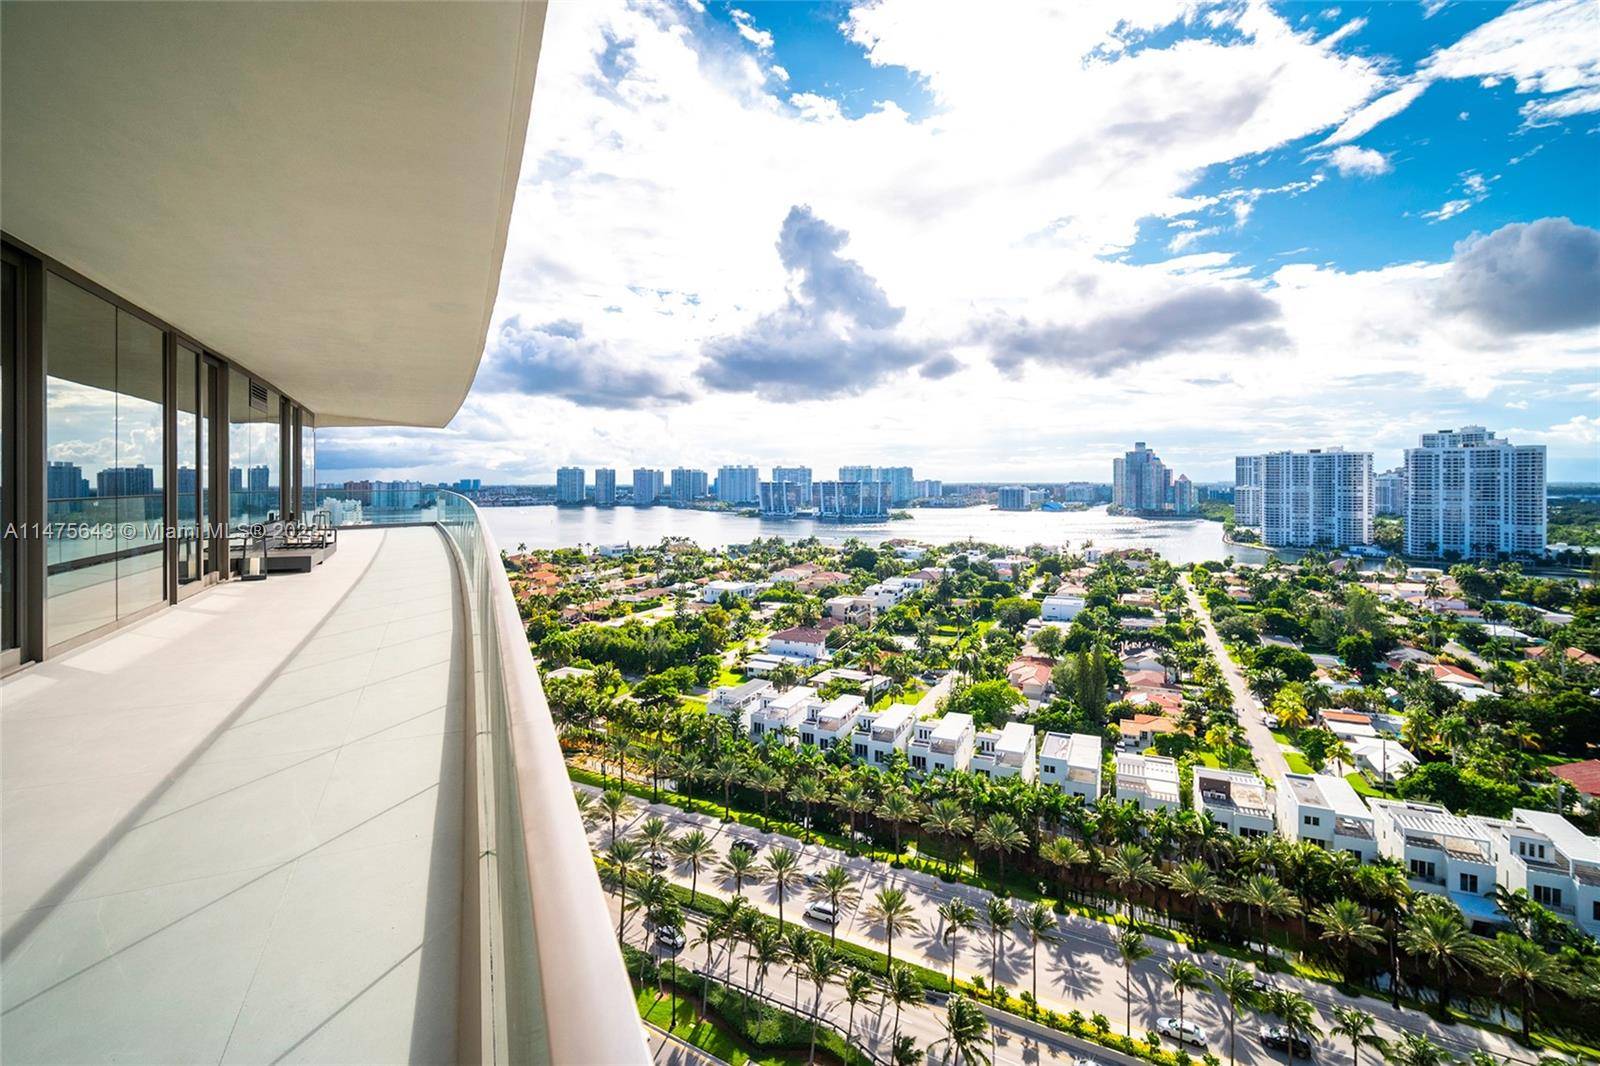 THIS CORNER UNIT HAS UNBEATABLE VIEWS OF INTRACOASTAL, AND OCEAN VIEWS.